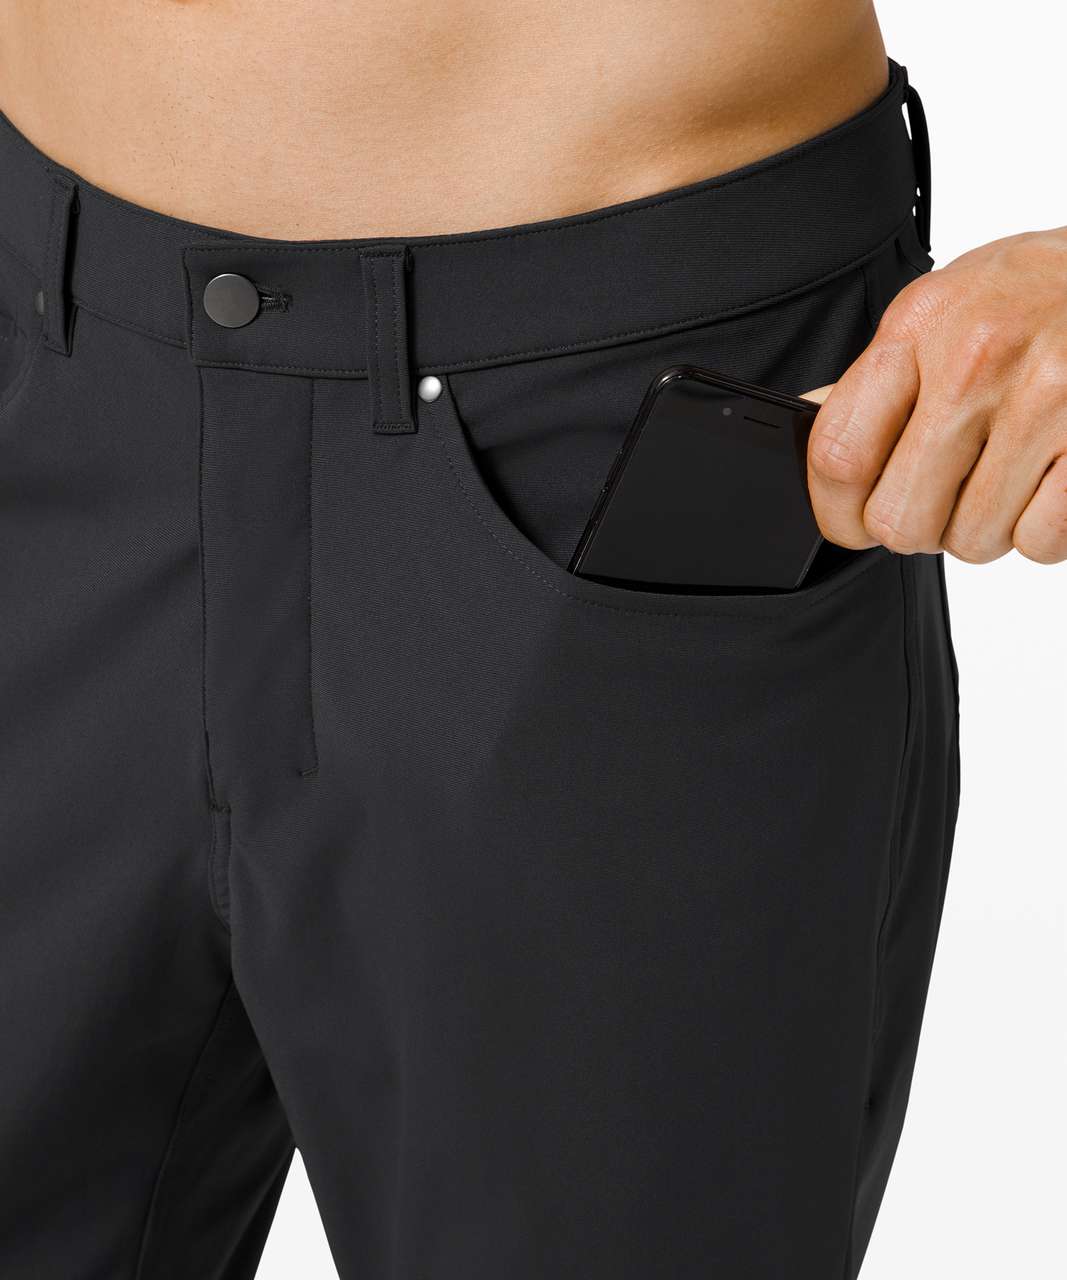 Lululemon ABC Pant Relaxed 34" *Warpstreme - Obsidian (First Release)